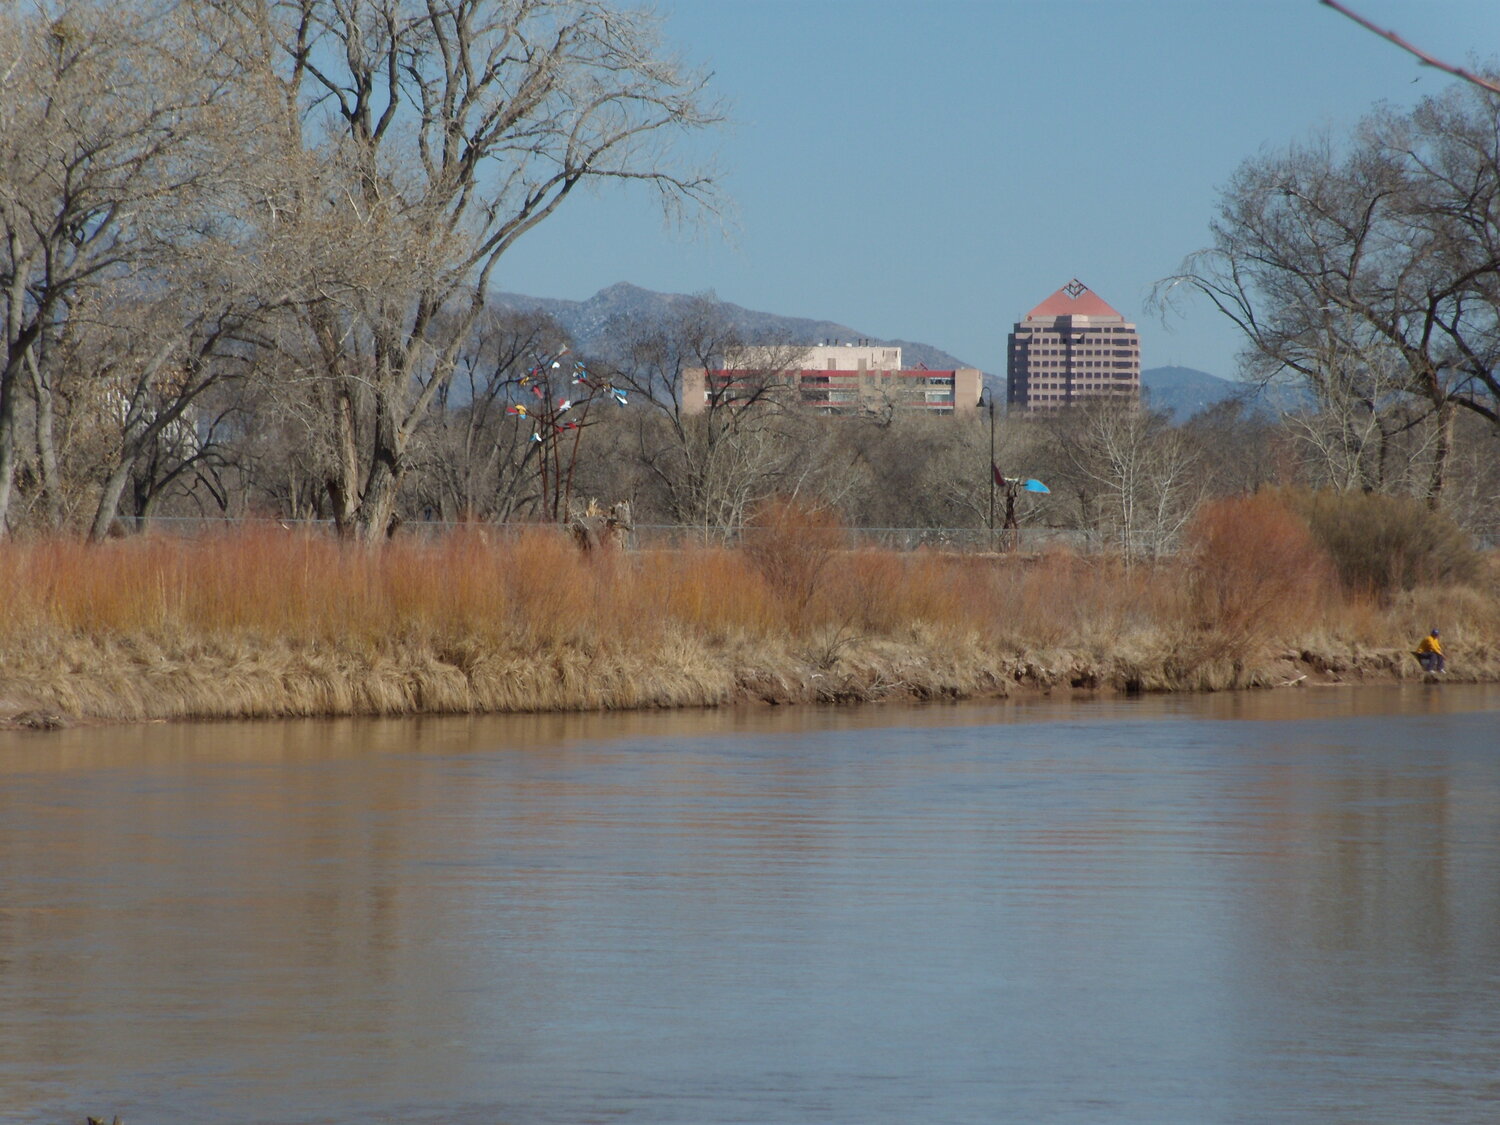 The Rio Grande Valley State Park was the fulfillment of Aldo Leopold’s vision for a riparian reserve in Albuquerque, Downtown Albuquerque is in the background (photo by Brad Stebleton)